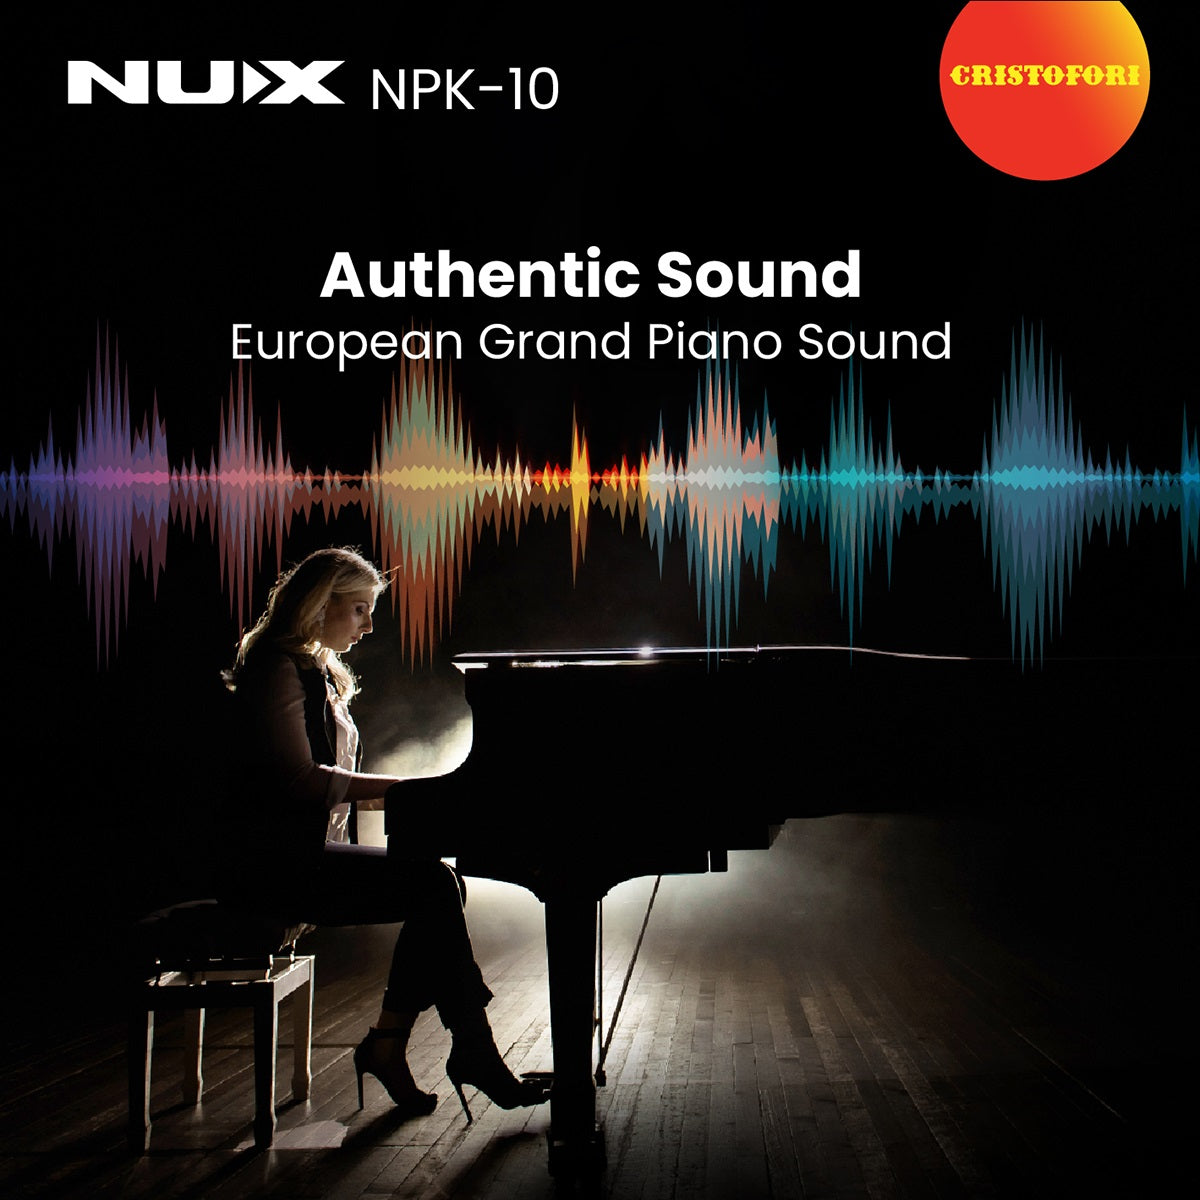 NUX Digital Piano -NPK-10 (White) - with X Stand